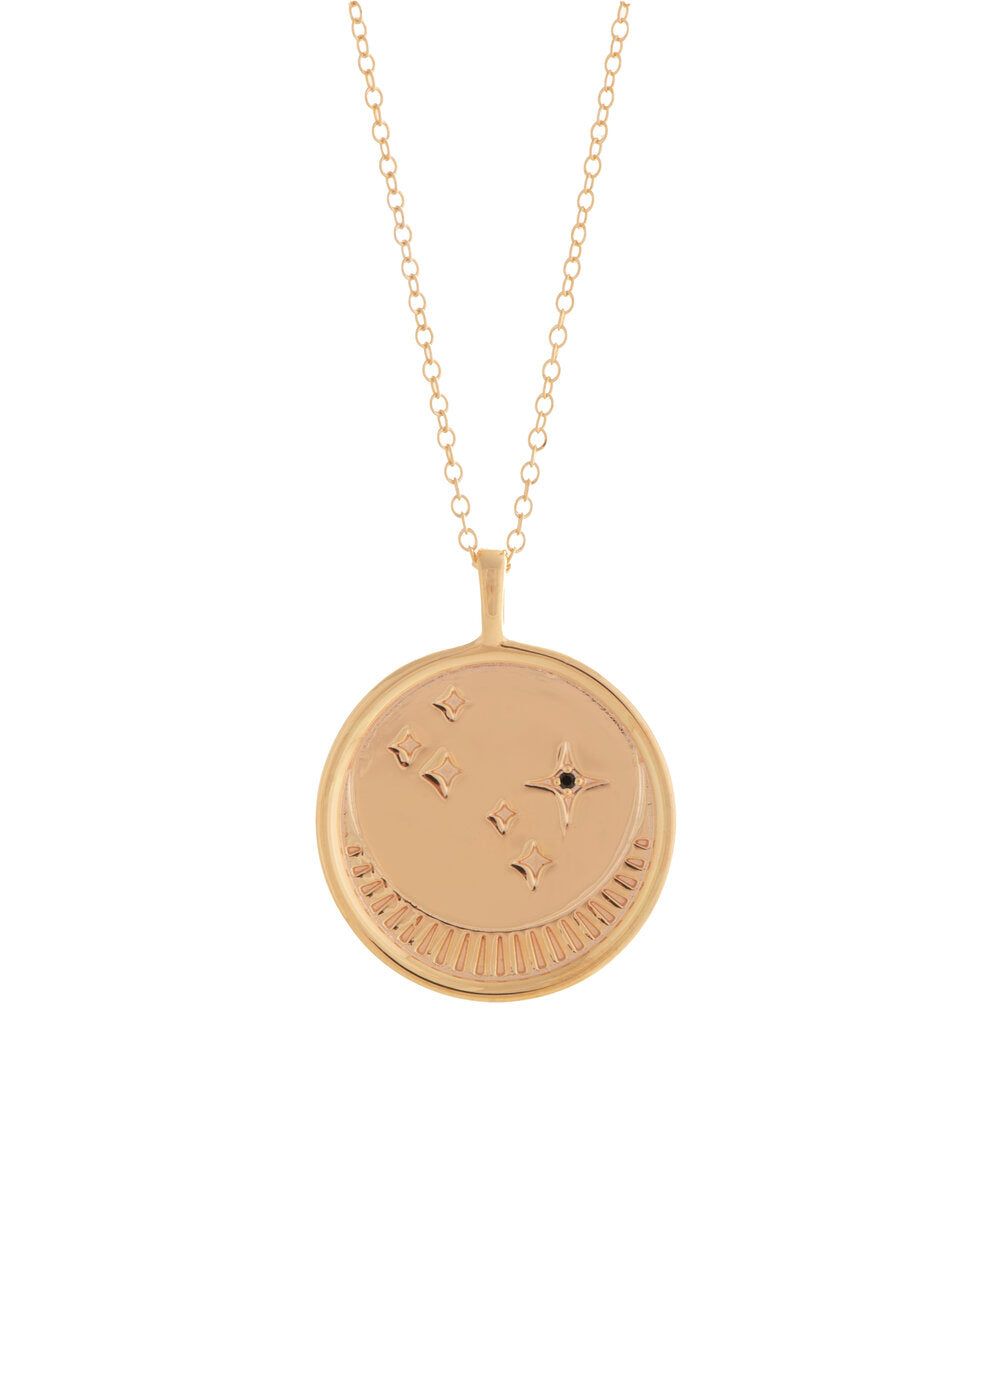 UNIKONCEPT Lifestyle boutique: image shows the Franz Necklace in gold rose quartz by Sarah Mulder. This necklace features a circular pendant engraved with a moon and star details as well as a small rose quartz stone. The pendant hangs from a delicate gold chain.